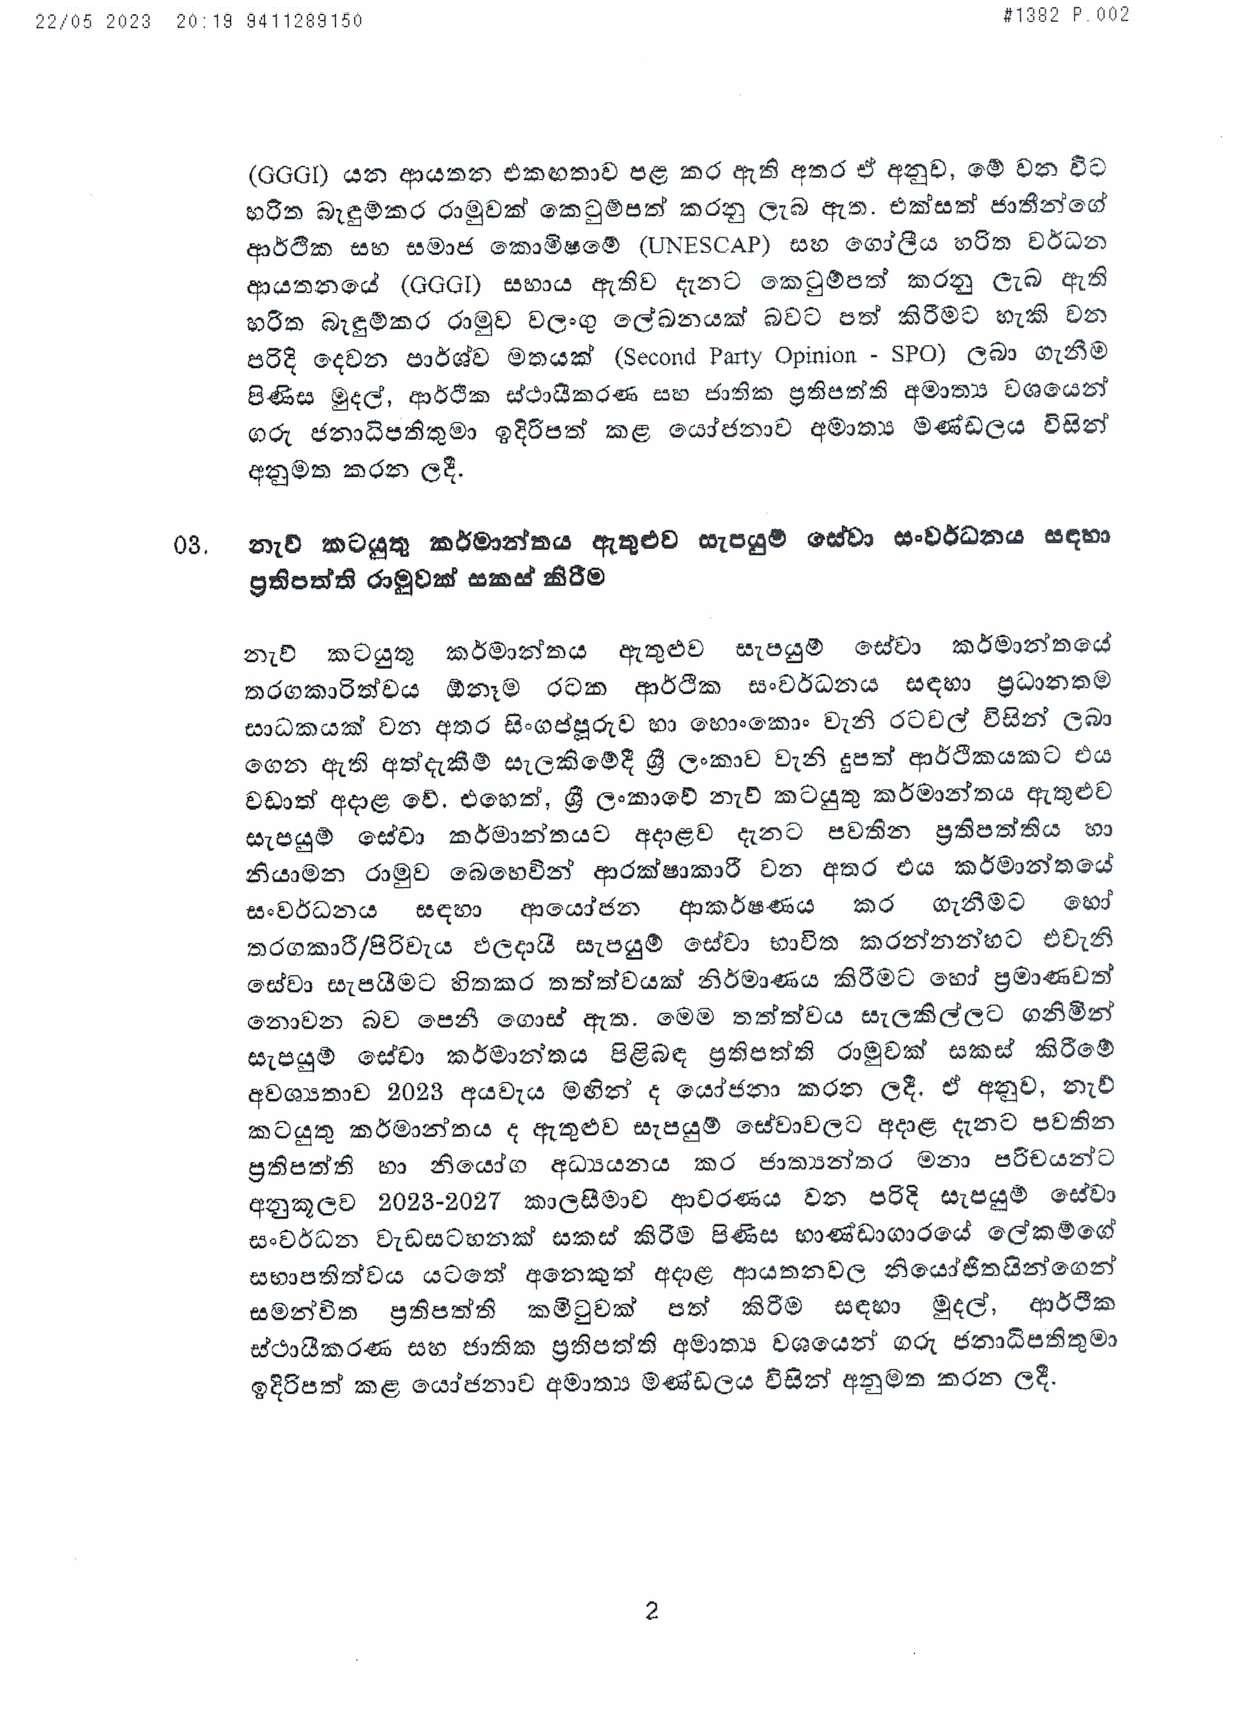 Cabinet Decisions on 22.05.2023 page 002